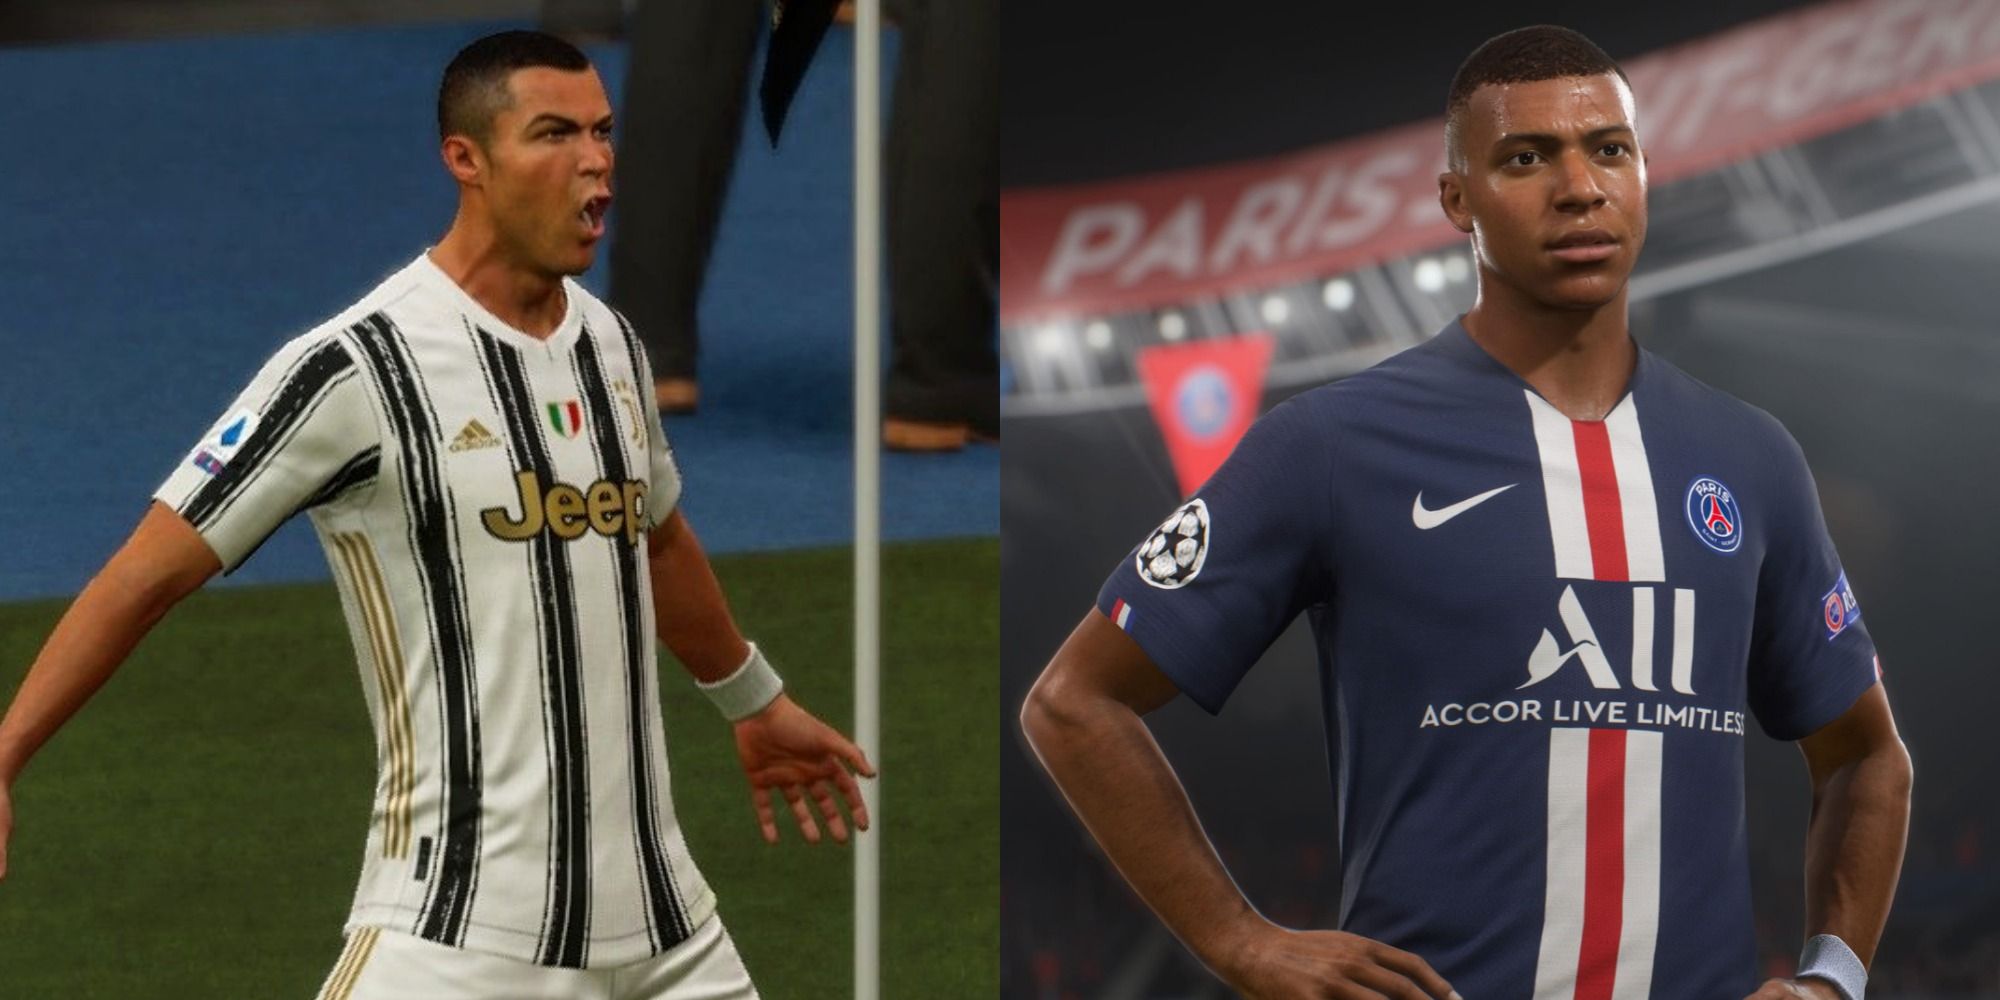 Split image of Cristiano Ronaldo and Kylian Mbappe in FIFA 21